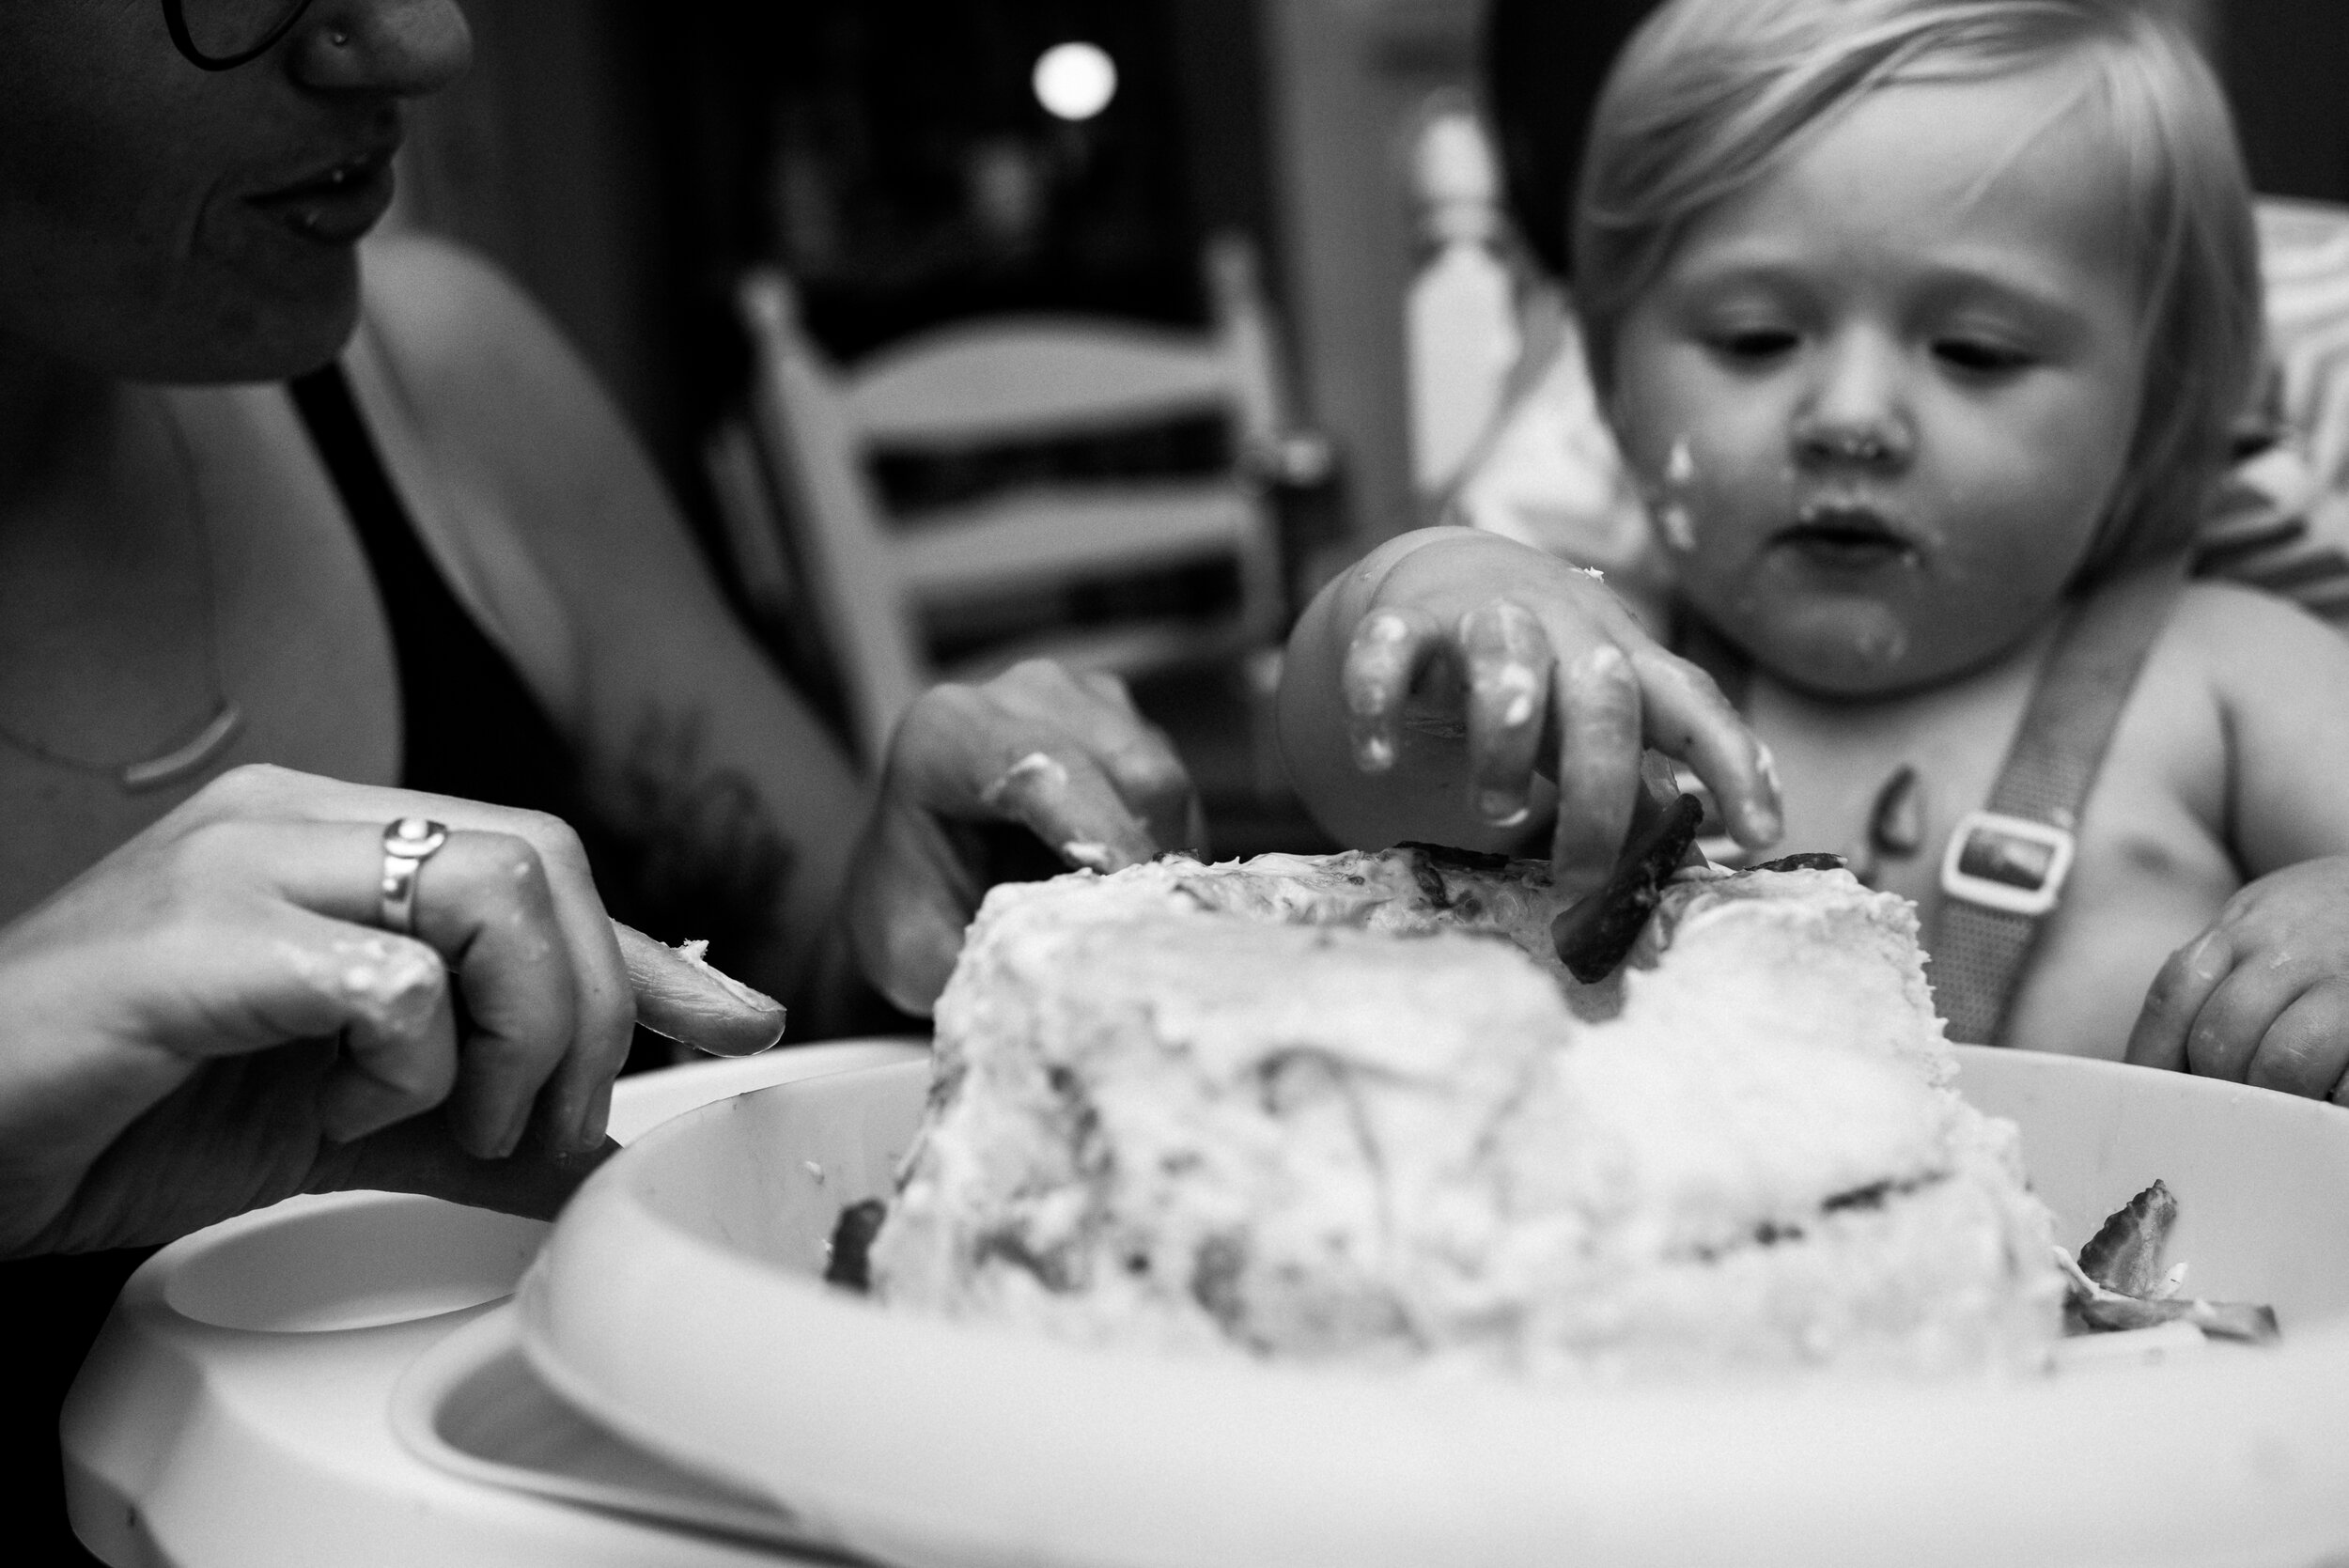 Toddler smashing his birthday cake at his first birthday during a family photo session in Kingston, Ontario